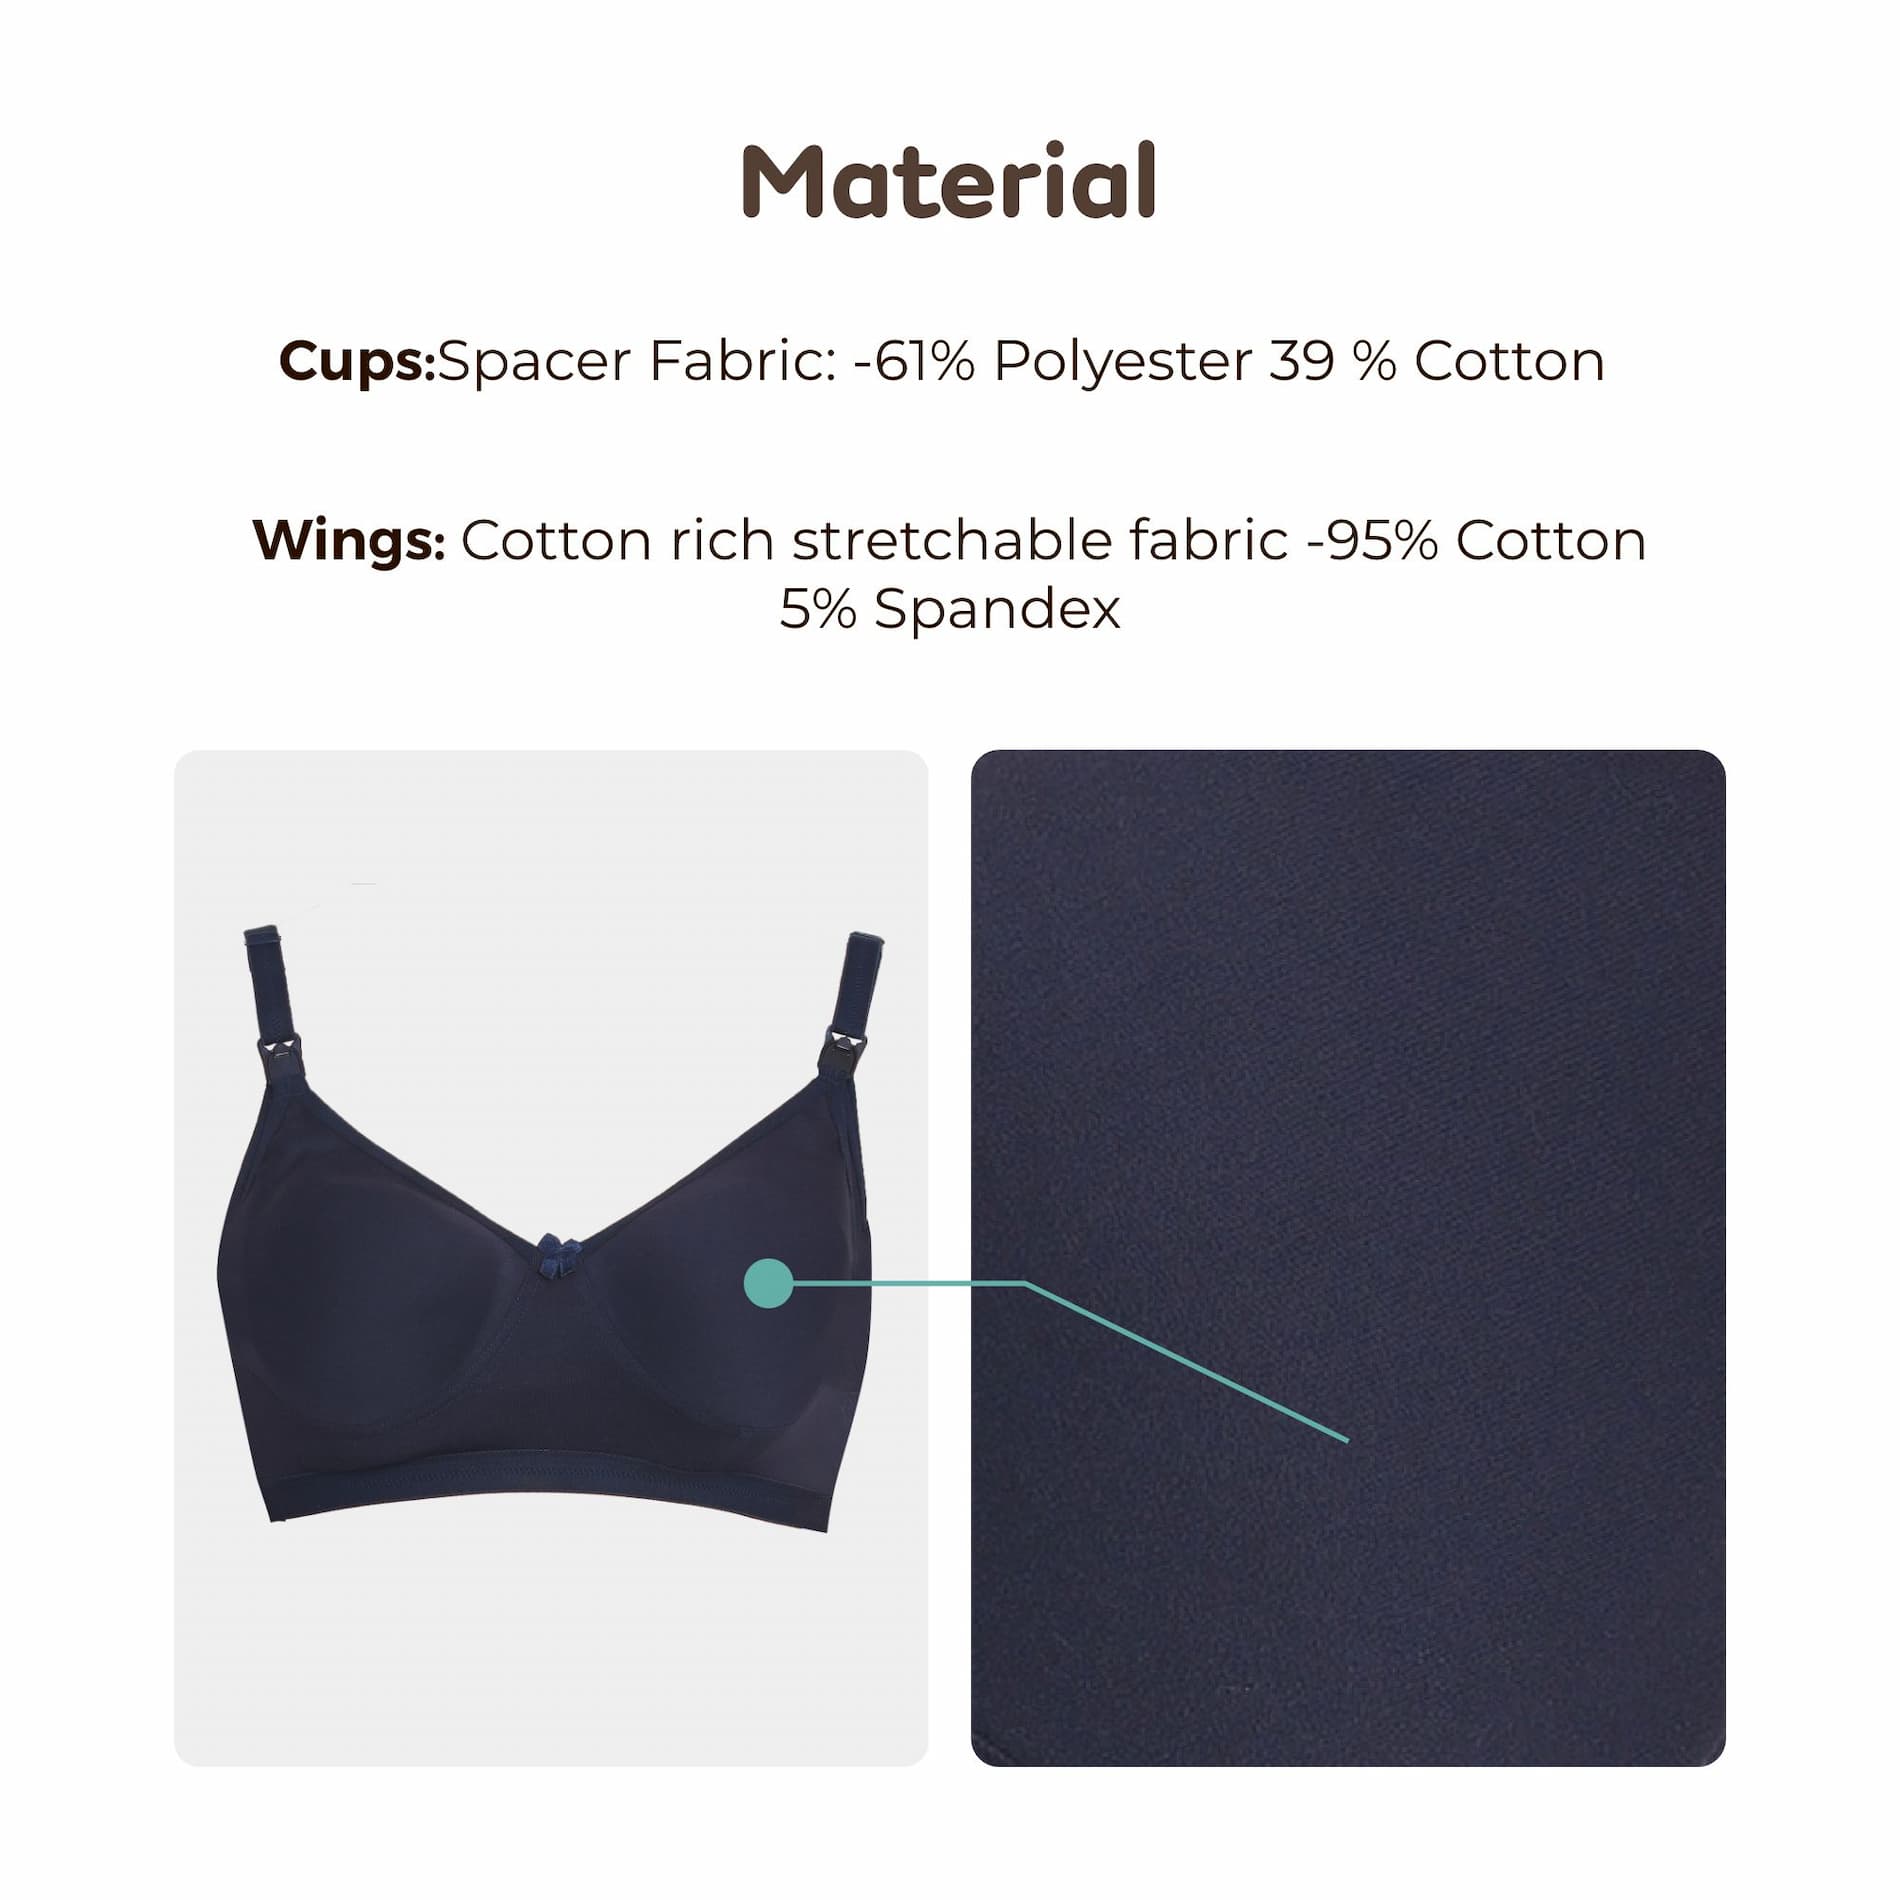 Mylo Maternity/Nursing Moulded Spacer Cup Bra with free bra extender -Navy  34 B 